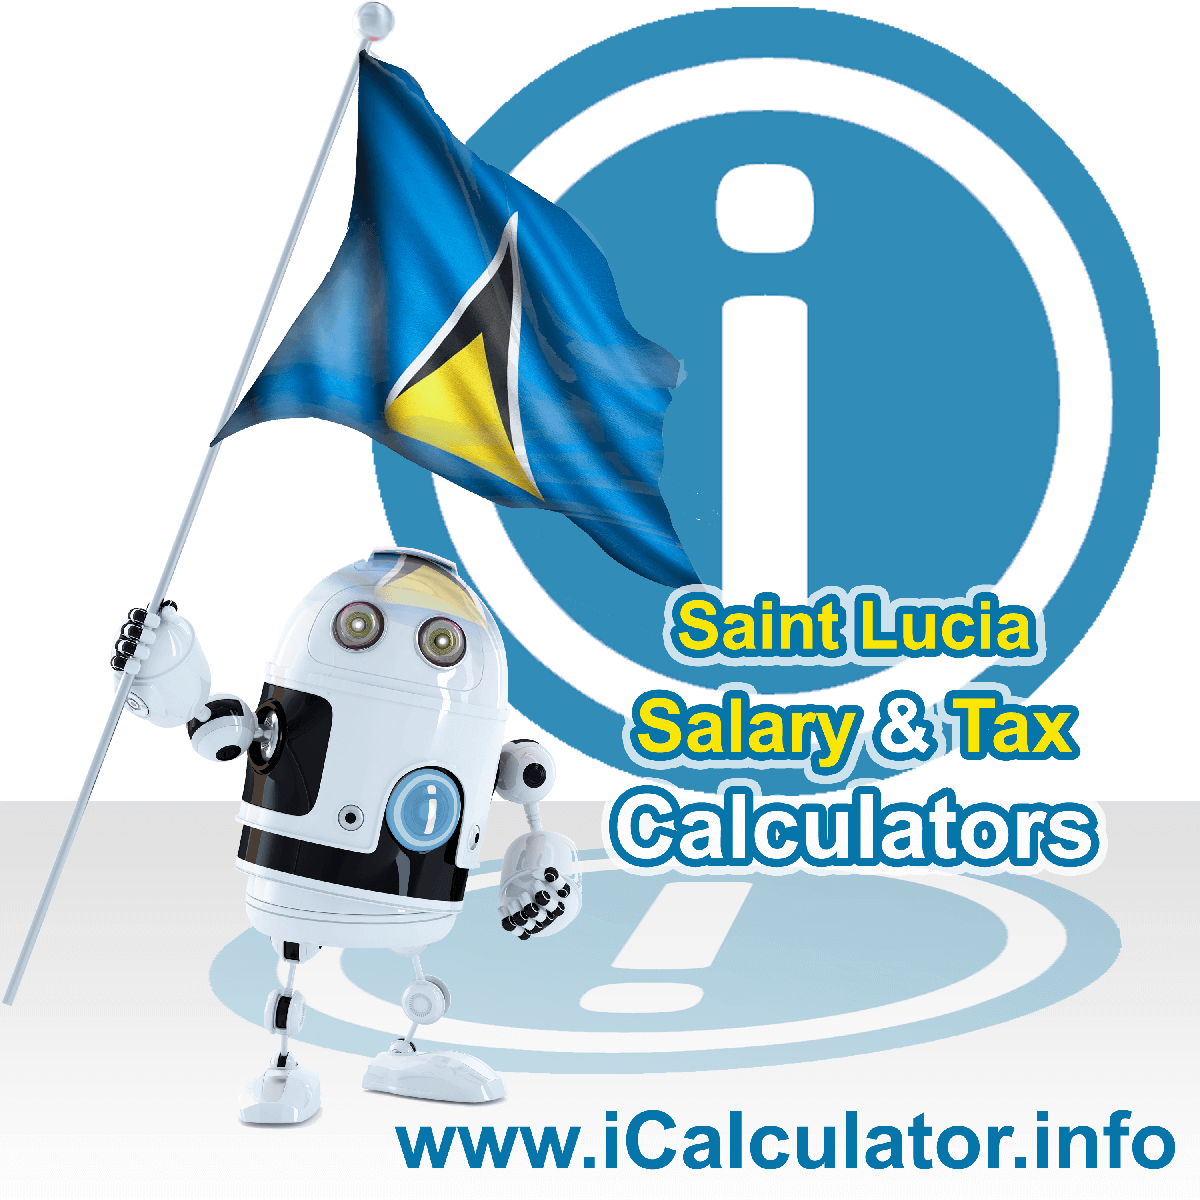 Saint Lucia Salary Calculator. This image shows the Saint Luciaese flag and information relating to the tax formula for the Saint Lucia Tax Calculator